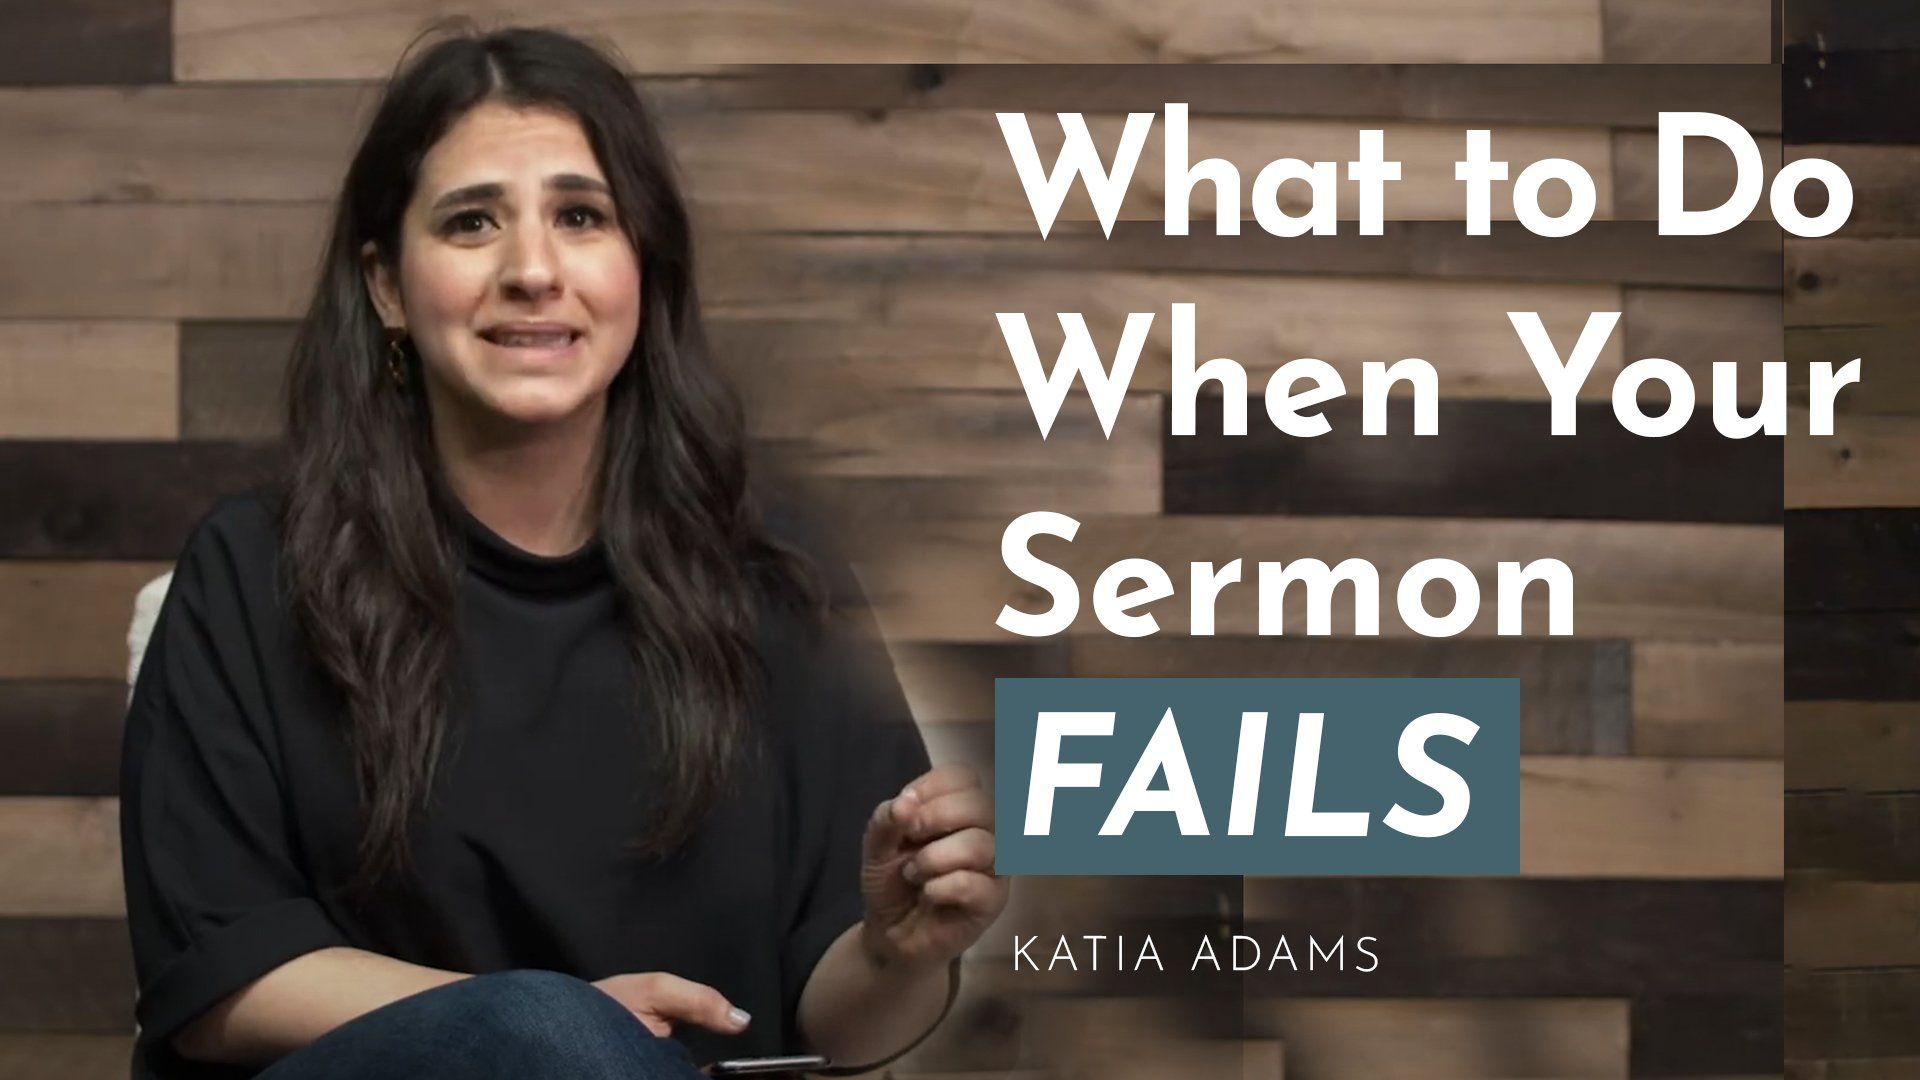 Katia Adams talks about what to do when your sermon fails.